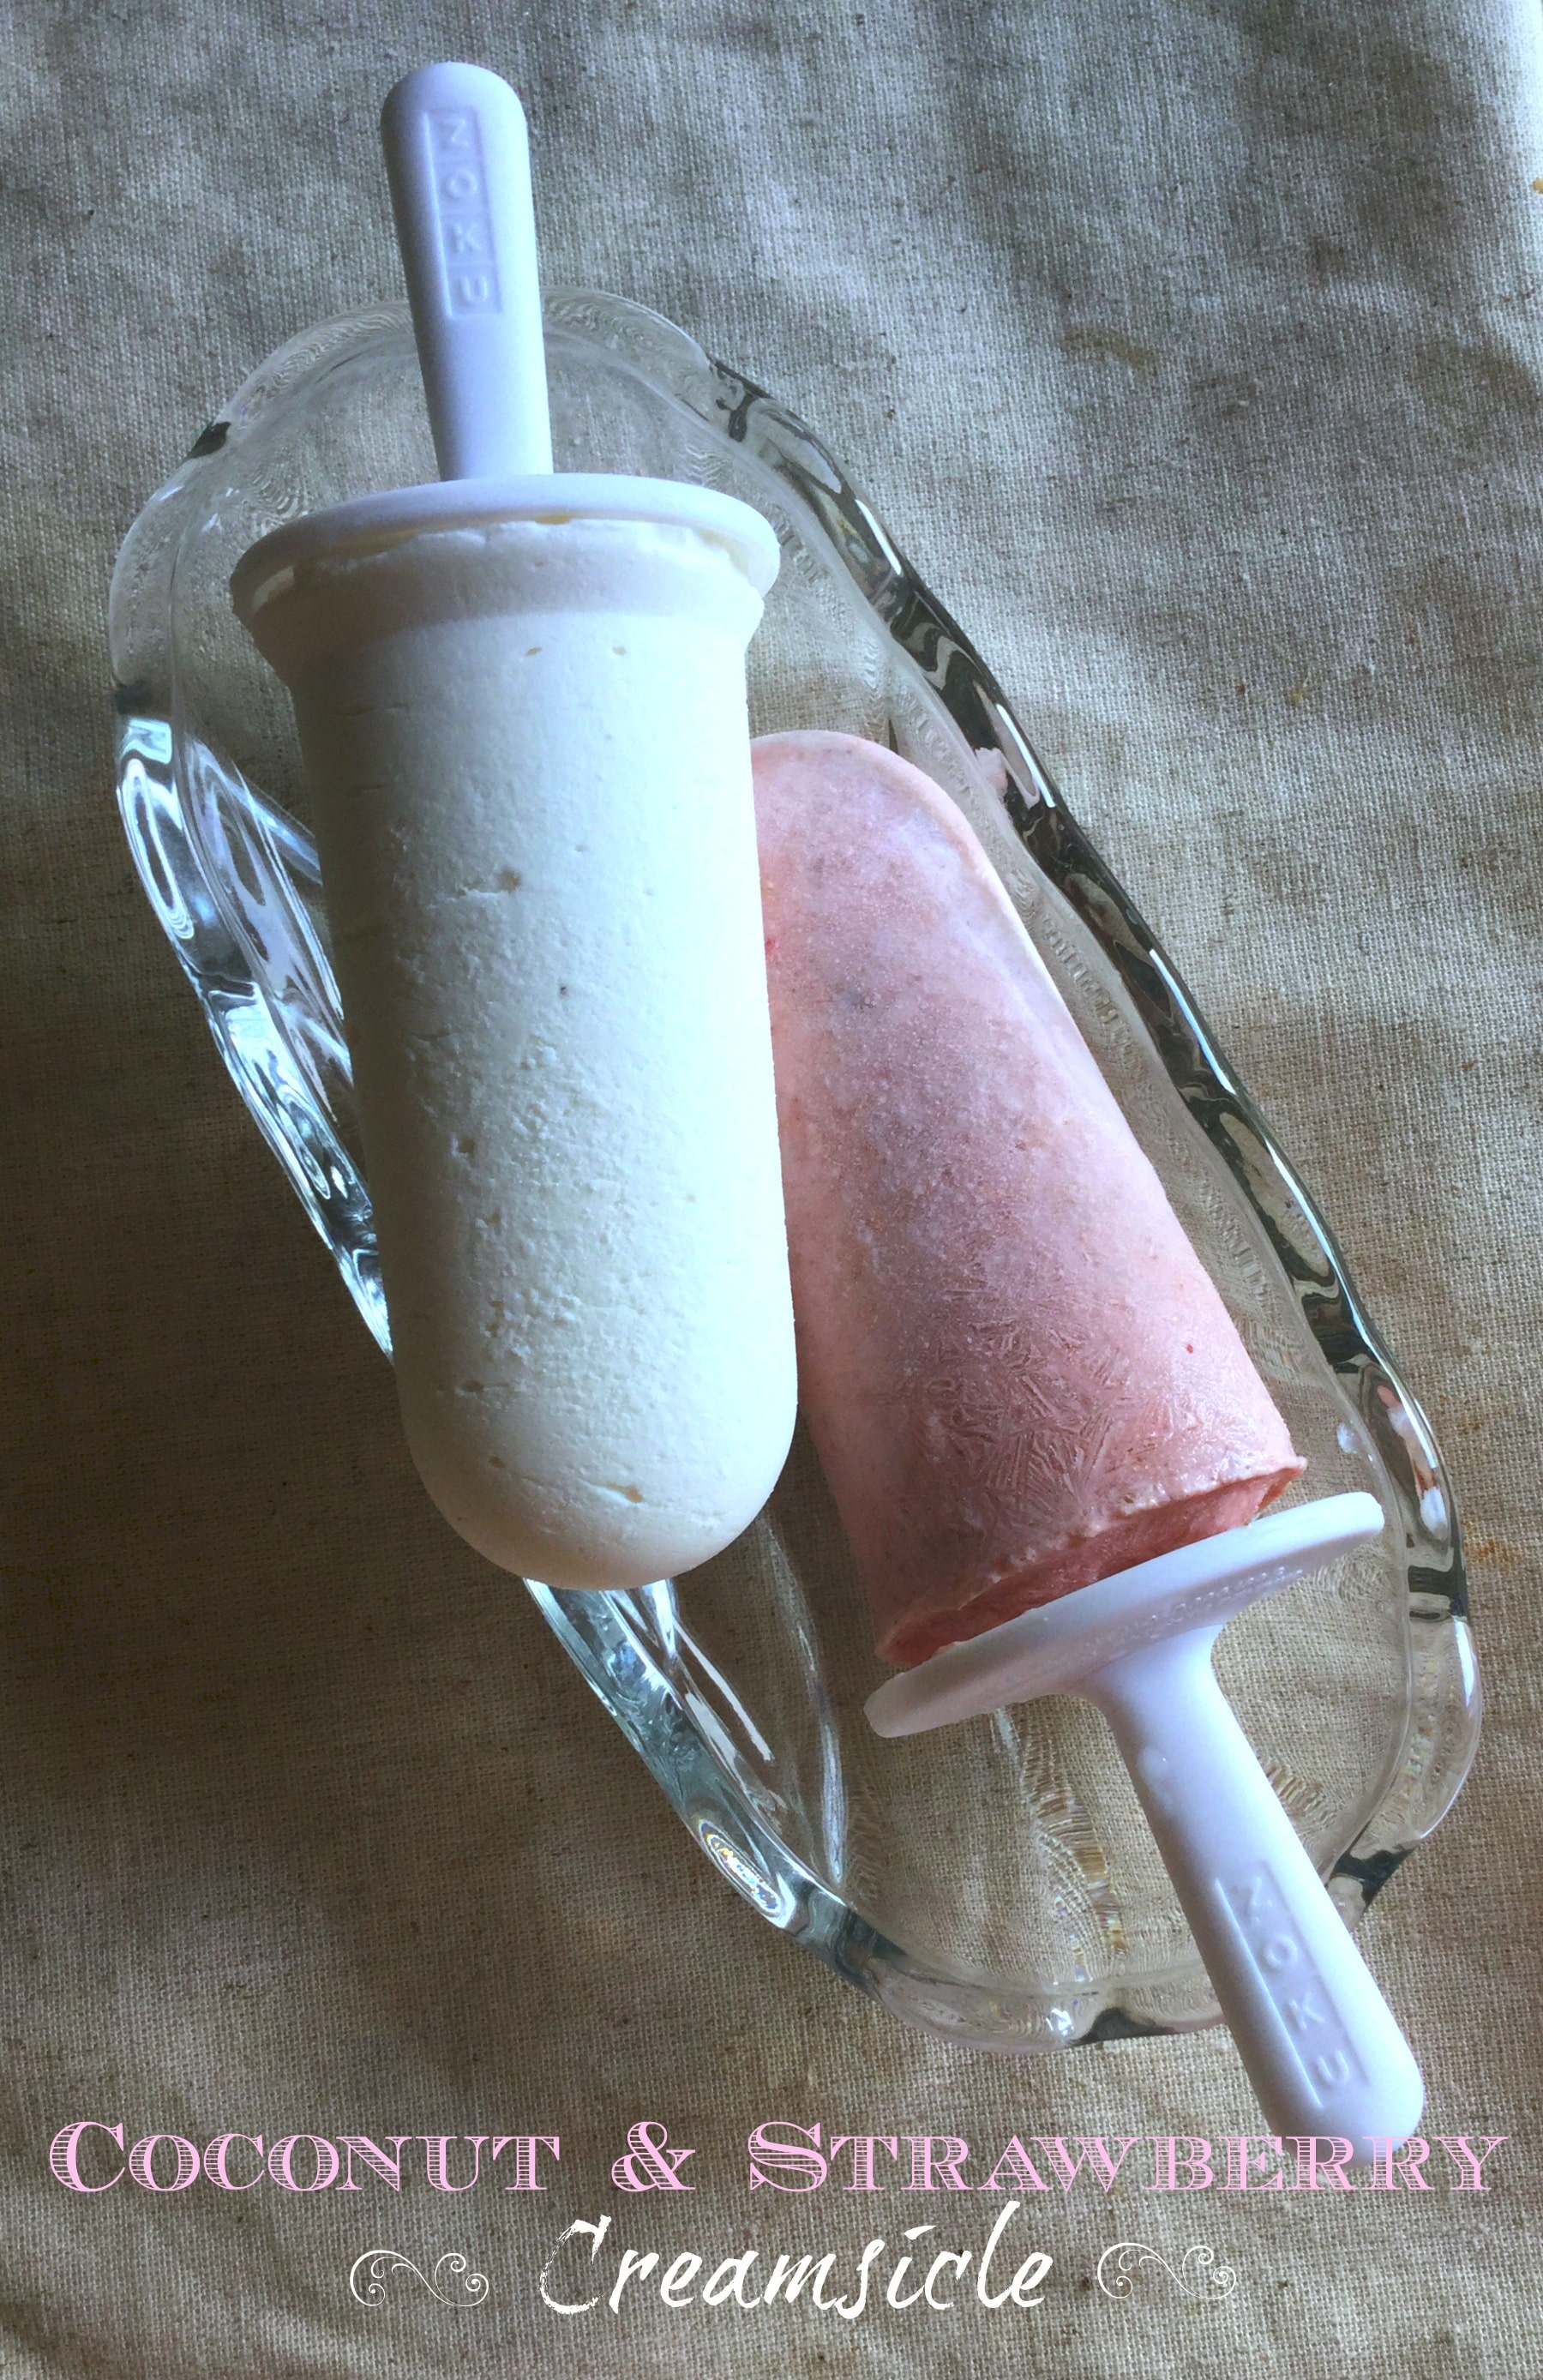 Two deliciously flavored popsicles perfect to cool off summer's heat and stay fit while enjoying the best summer flavors.